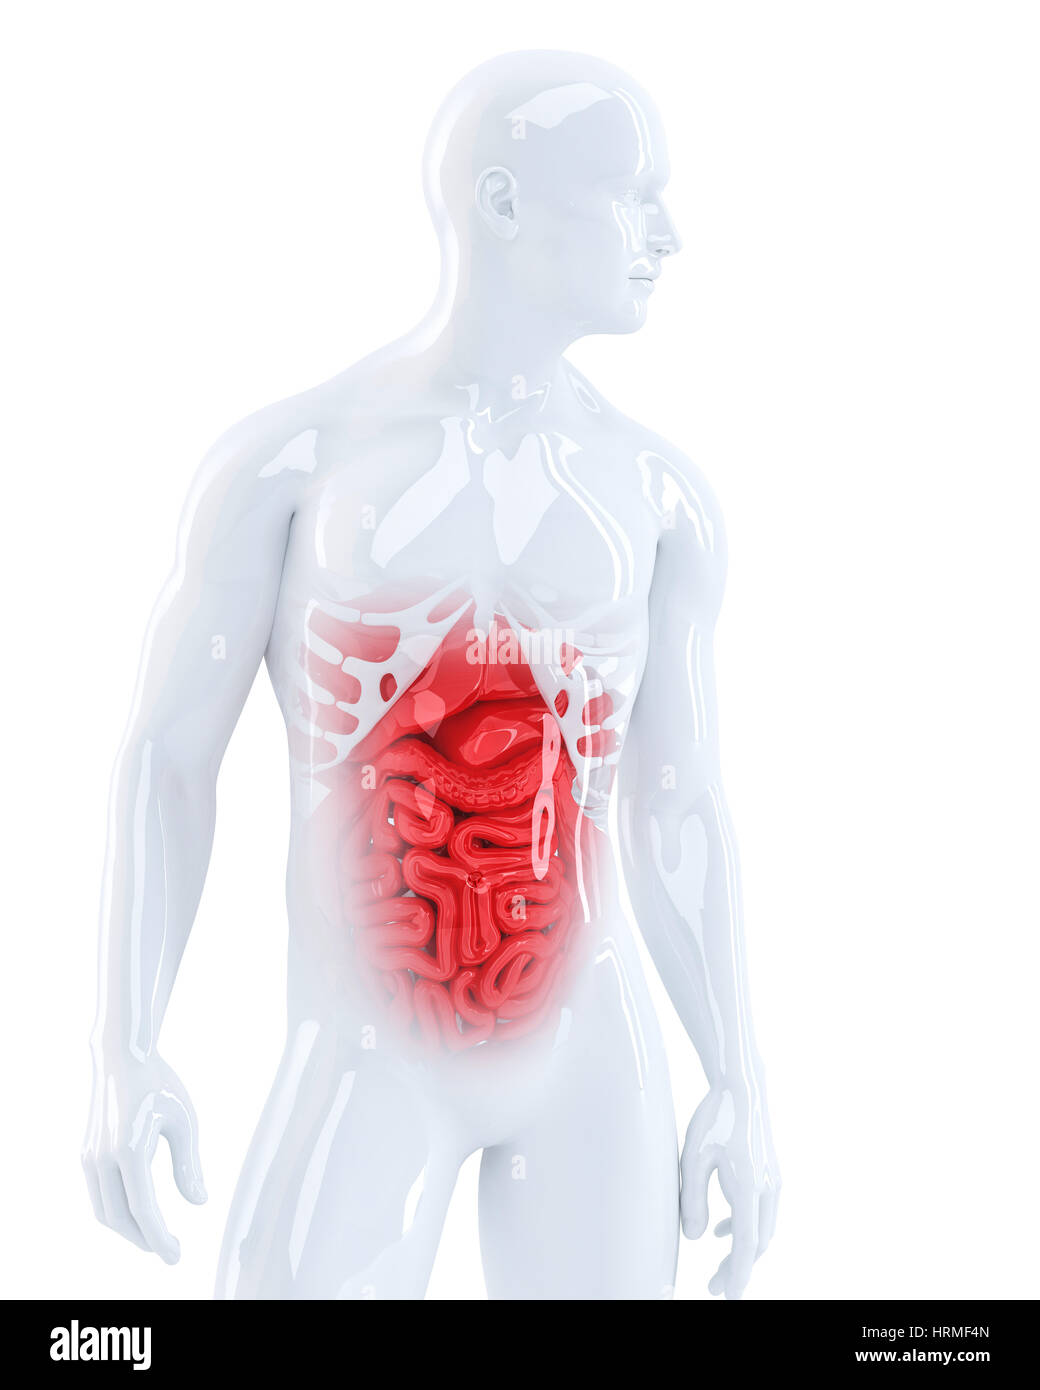 3d man displaying his internal organs. Medical illustration. Isolated. Contains clipping path Stock Photo